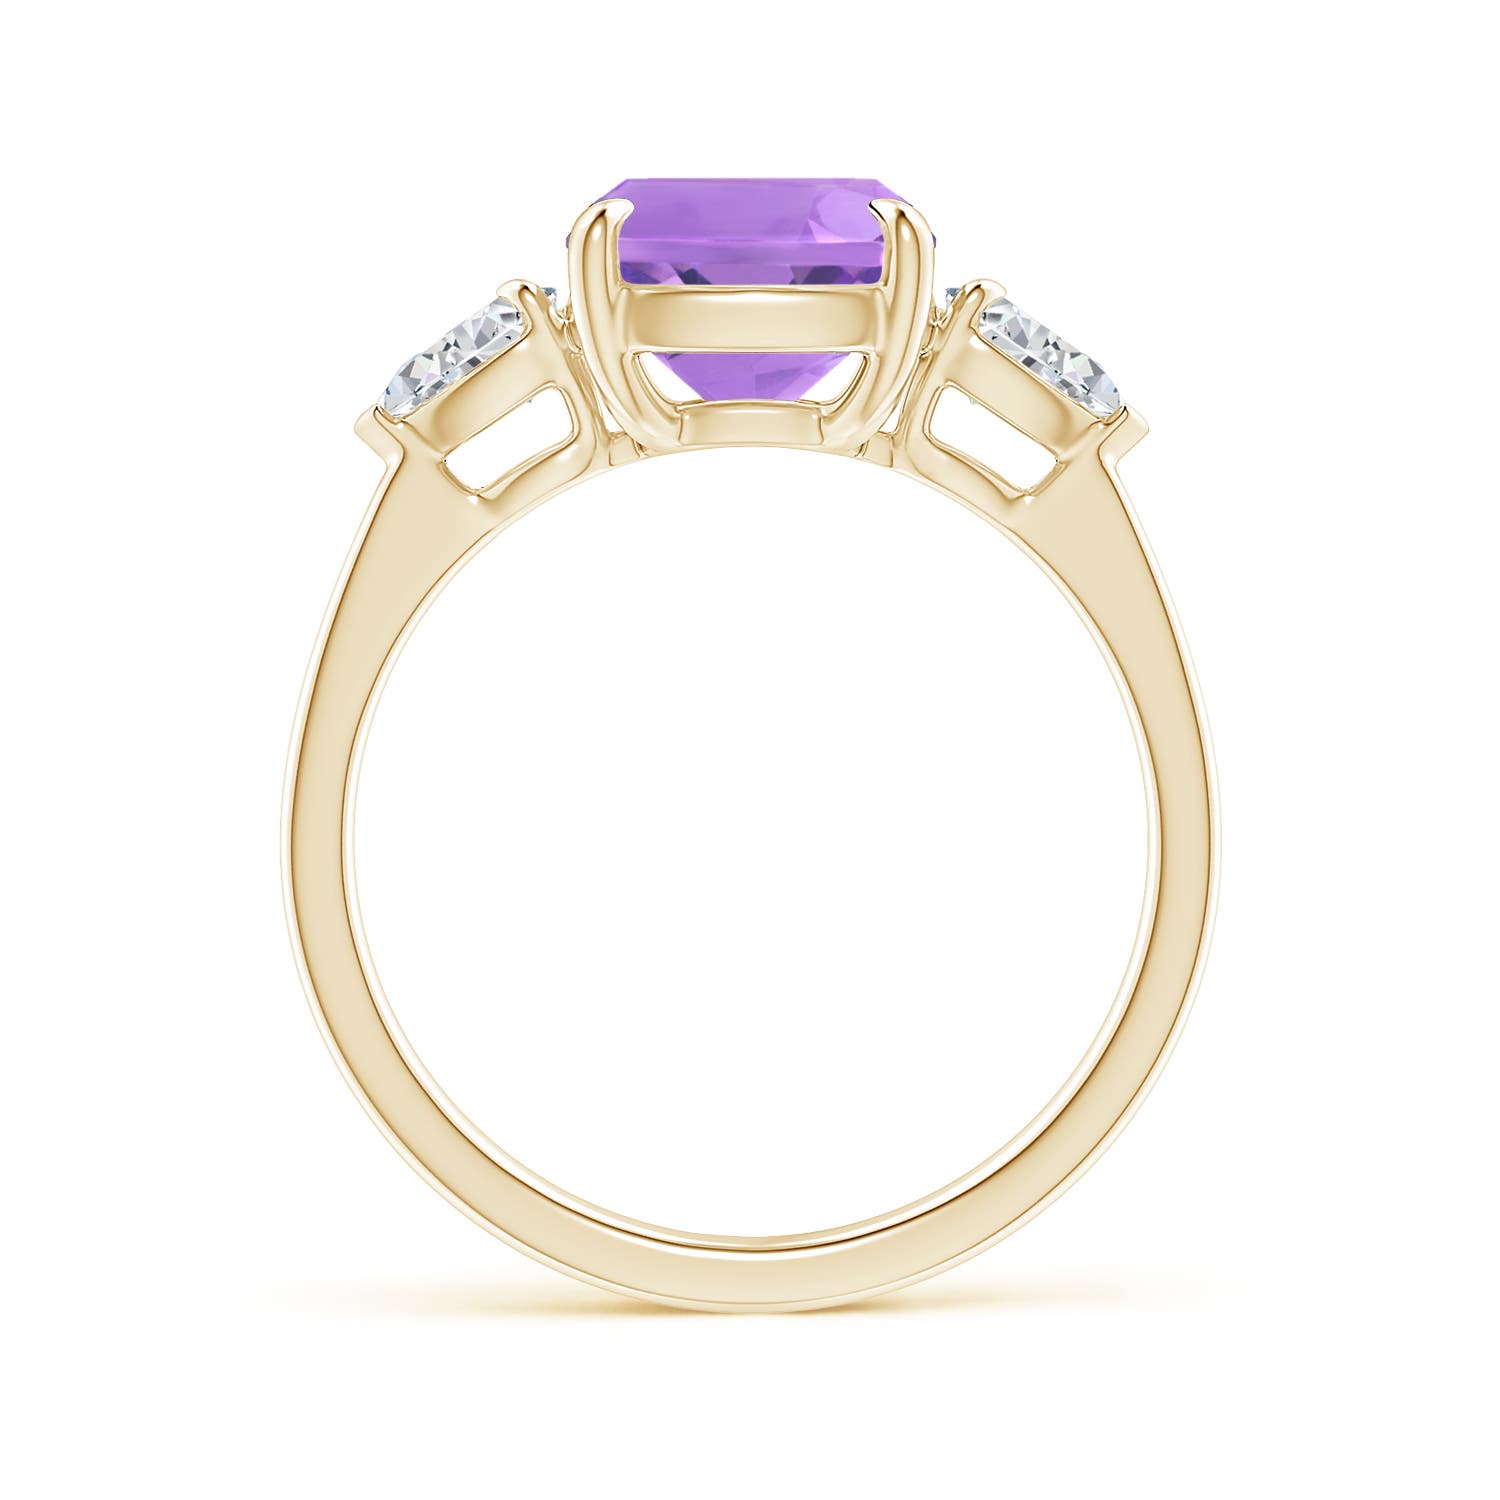 A - Amethyst / 3.1 CT / 14 KT Yellow Gold